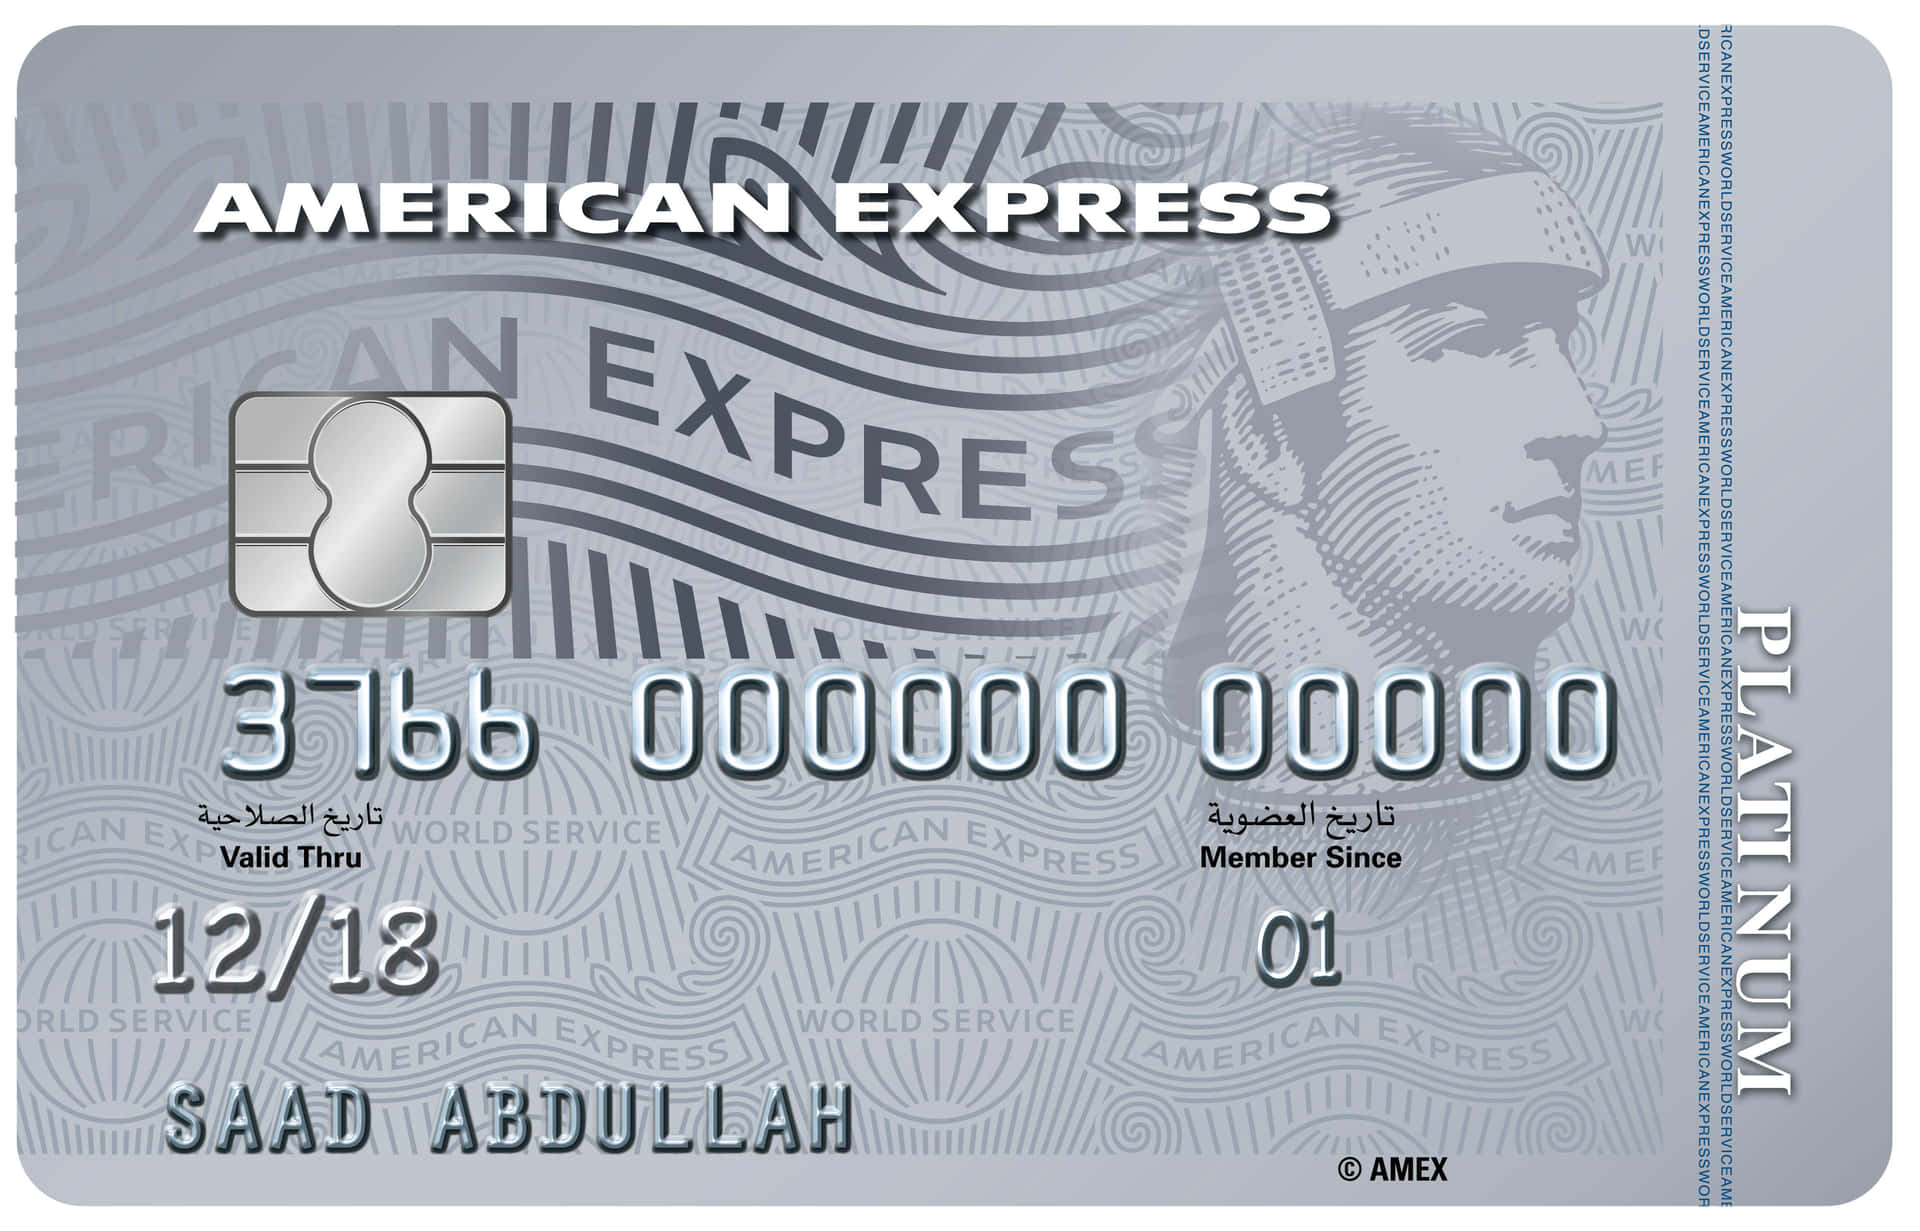 Experience the American Express Difference